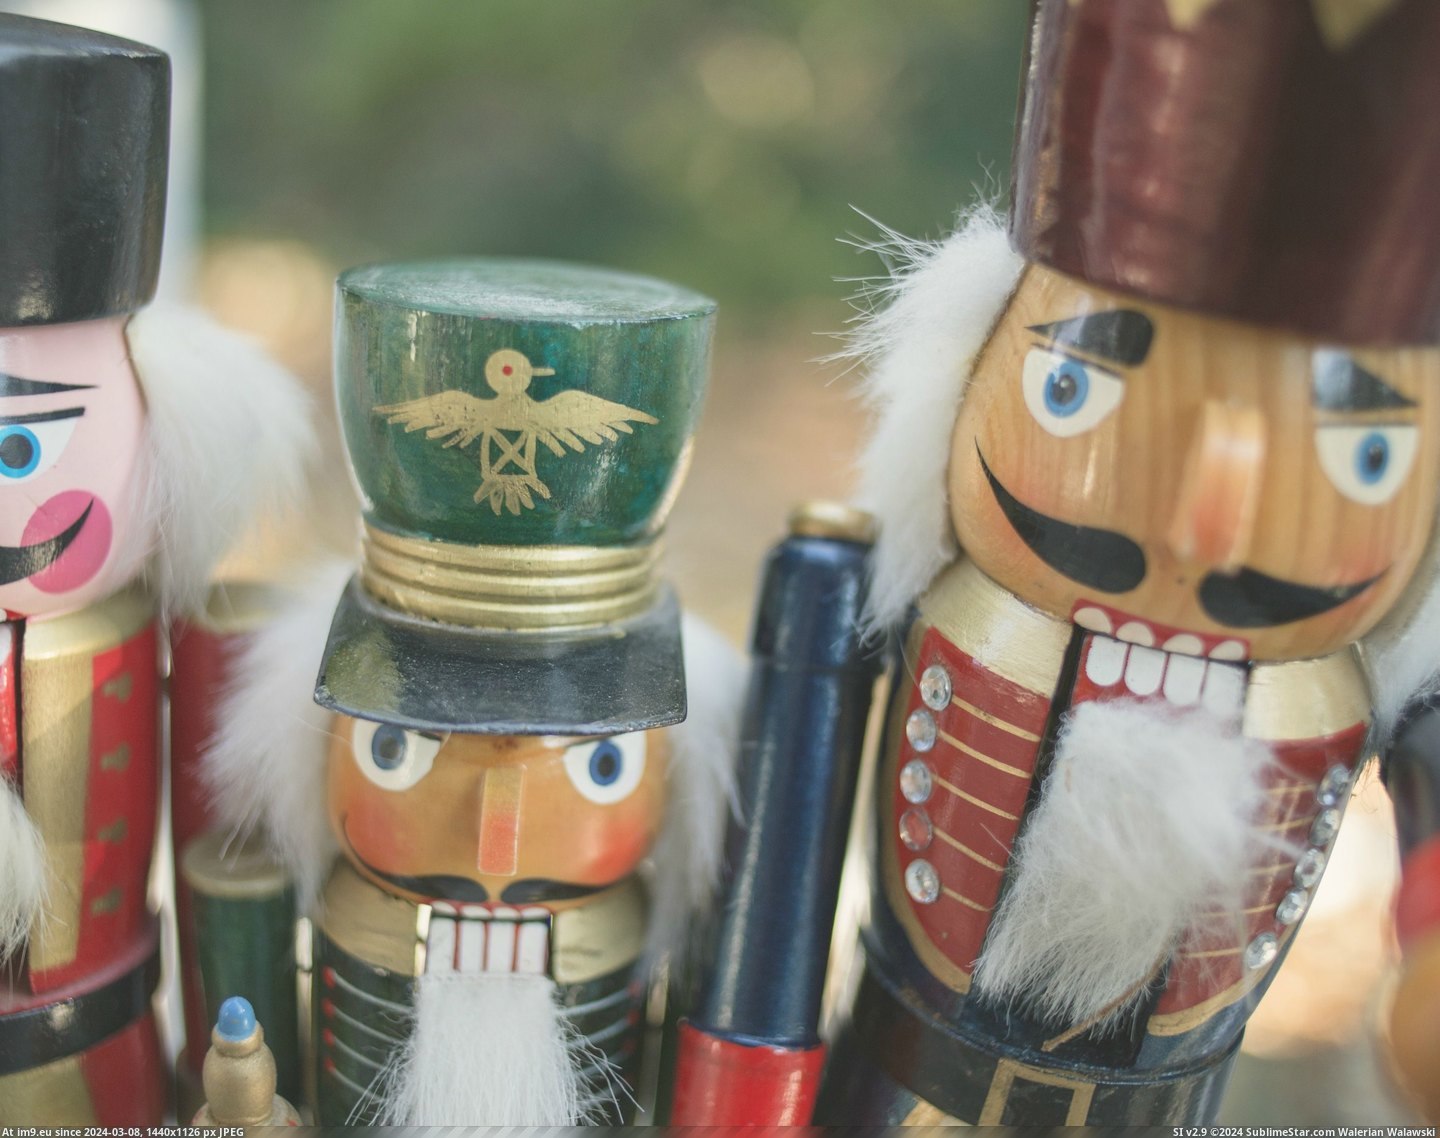 #For #Year #Friend #Stole #Nutcracker #Christmas #Amazing #Got [Pics] Last Christmas I stole my friend's nutcracker - this year, he got these back: 'most amazing thing anyone has done for me  Pic. (Bild von album My r/PICS favs))